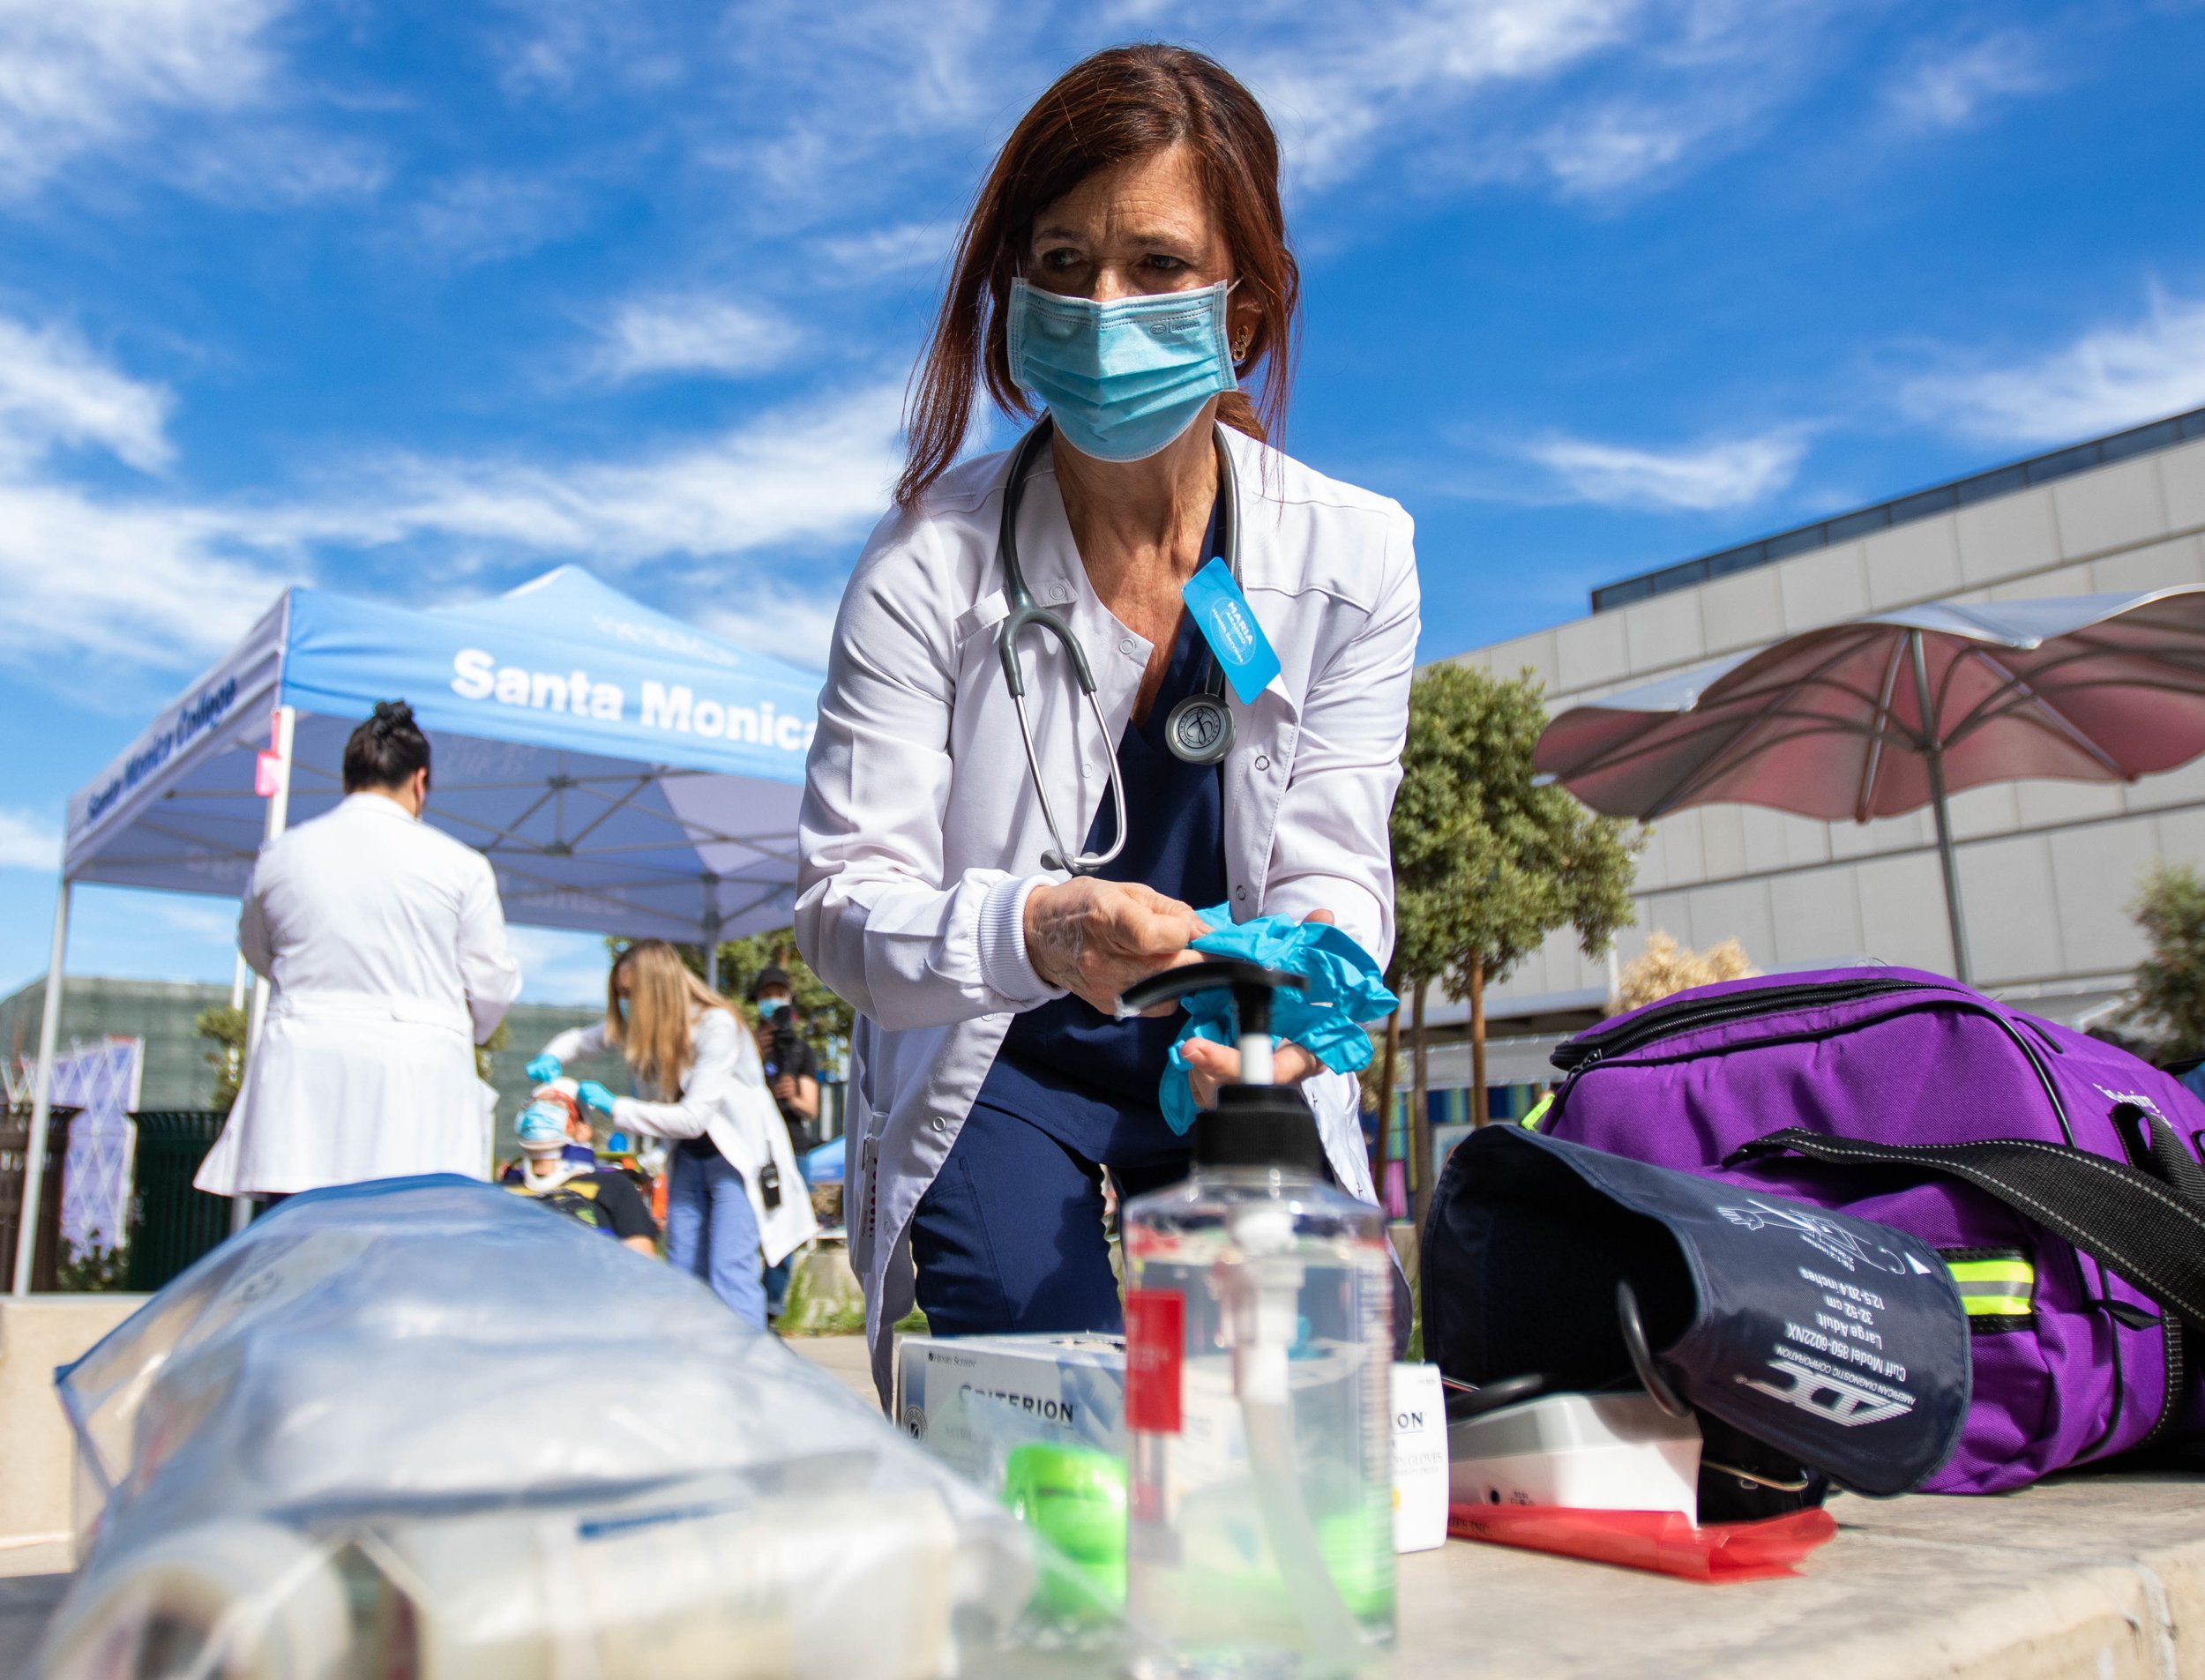  Santa Monica College (SMC) Nurse Practioner Maria Arango rushes to grab a pair of gloves as student Daniel Torres receives medical attention outside the SMC Student Services Center. Torres is one of the simulated injured drill participant for the 20